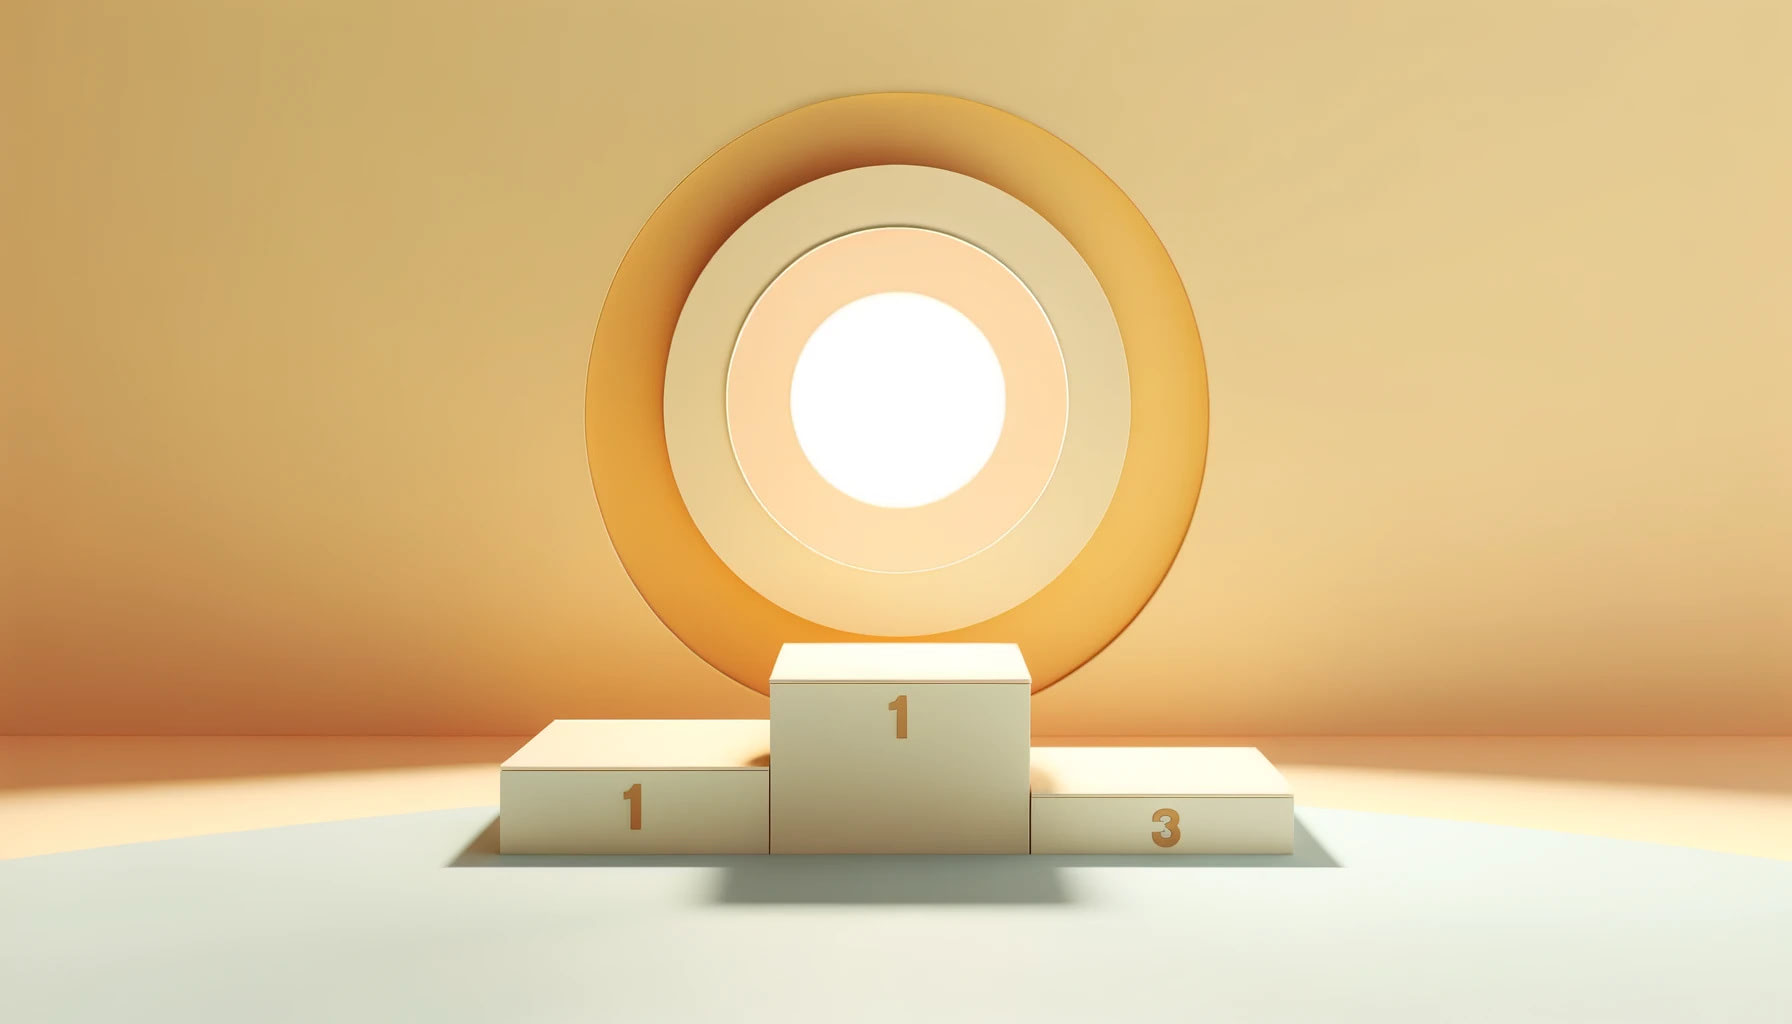 Abstract 3D rendering of a podium with positions 1, 2, and 3, in summer colors under a midday sun.